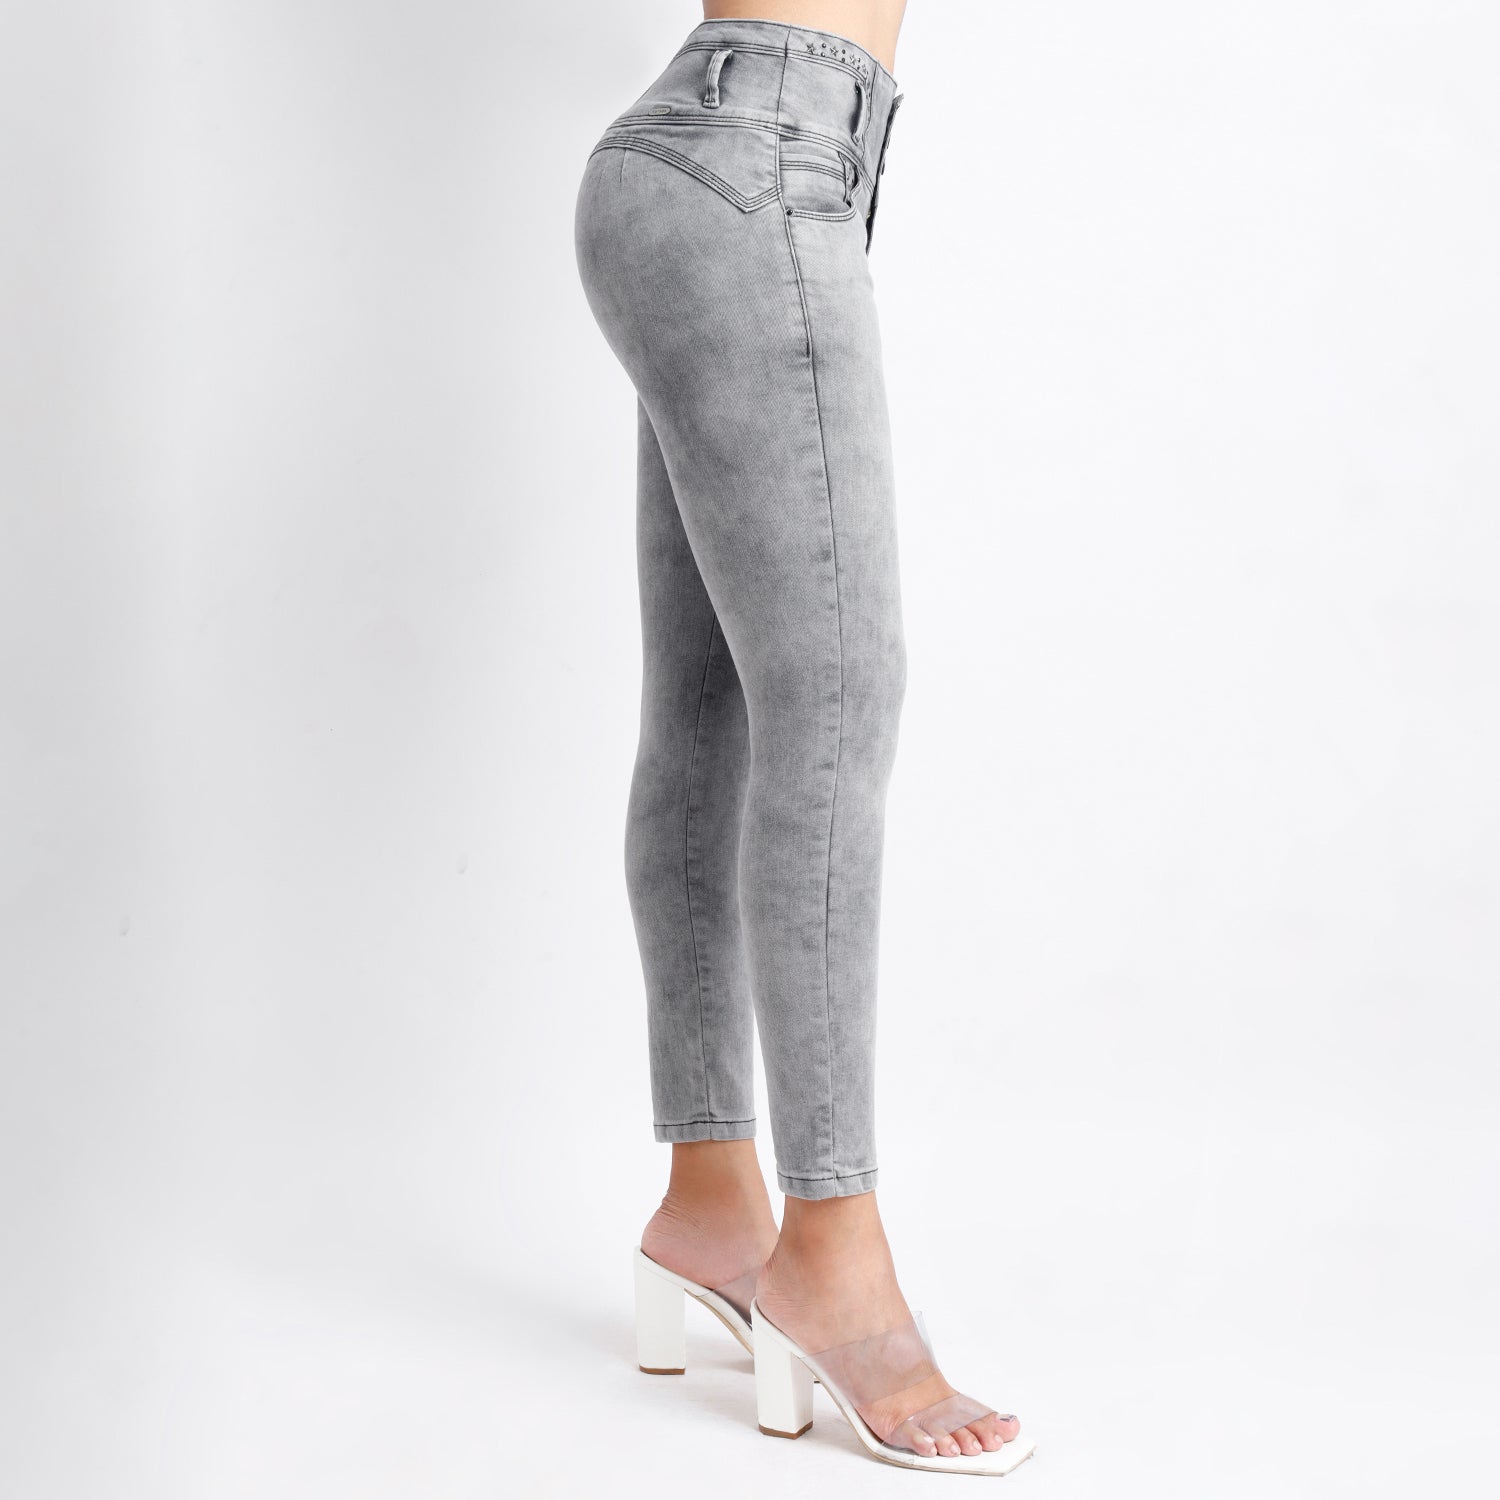 Ripley - JEANS MUJER PITILLOS GRIS